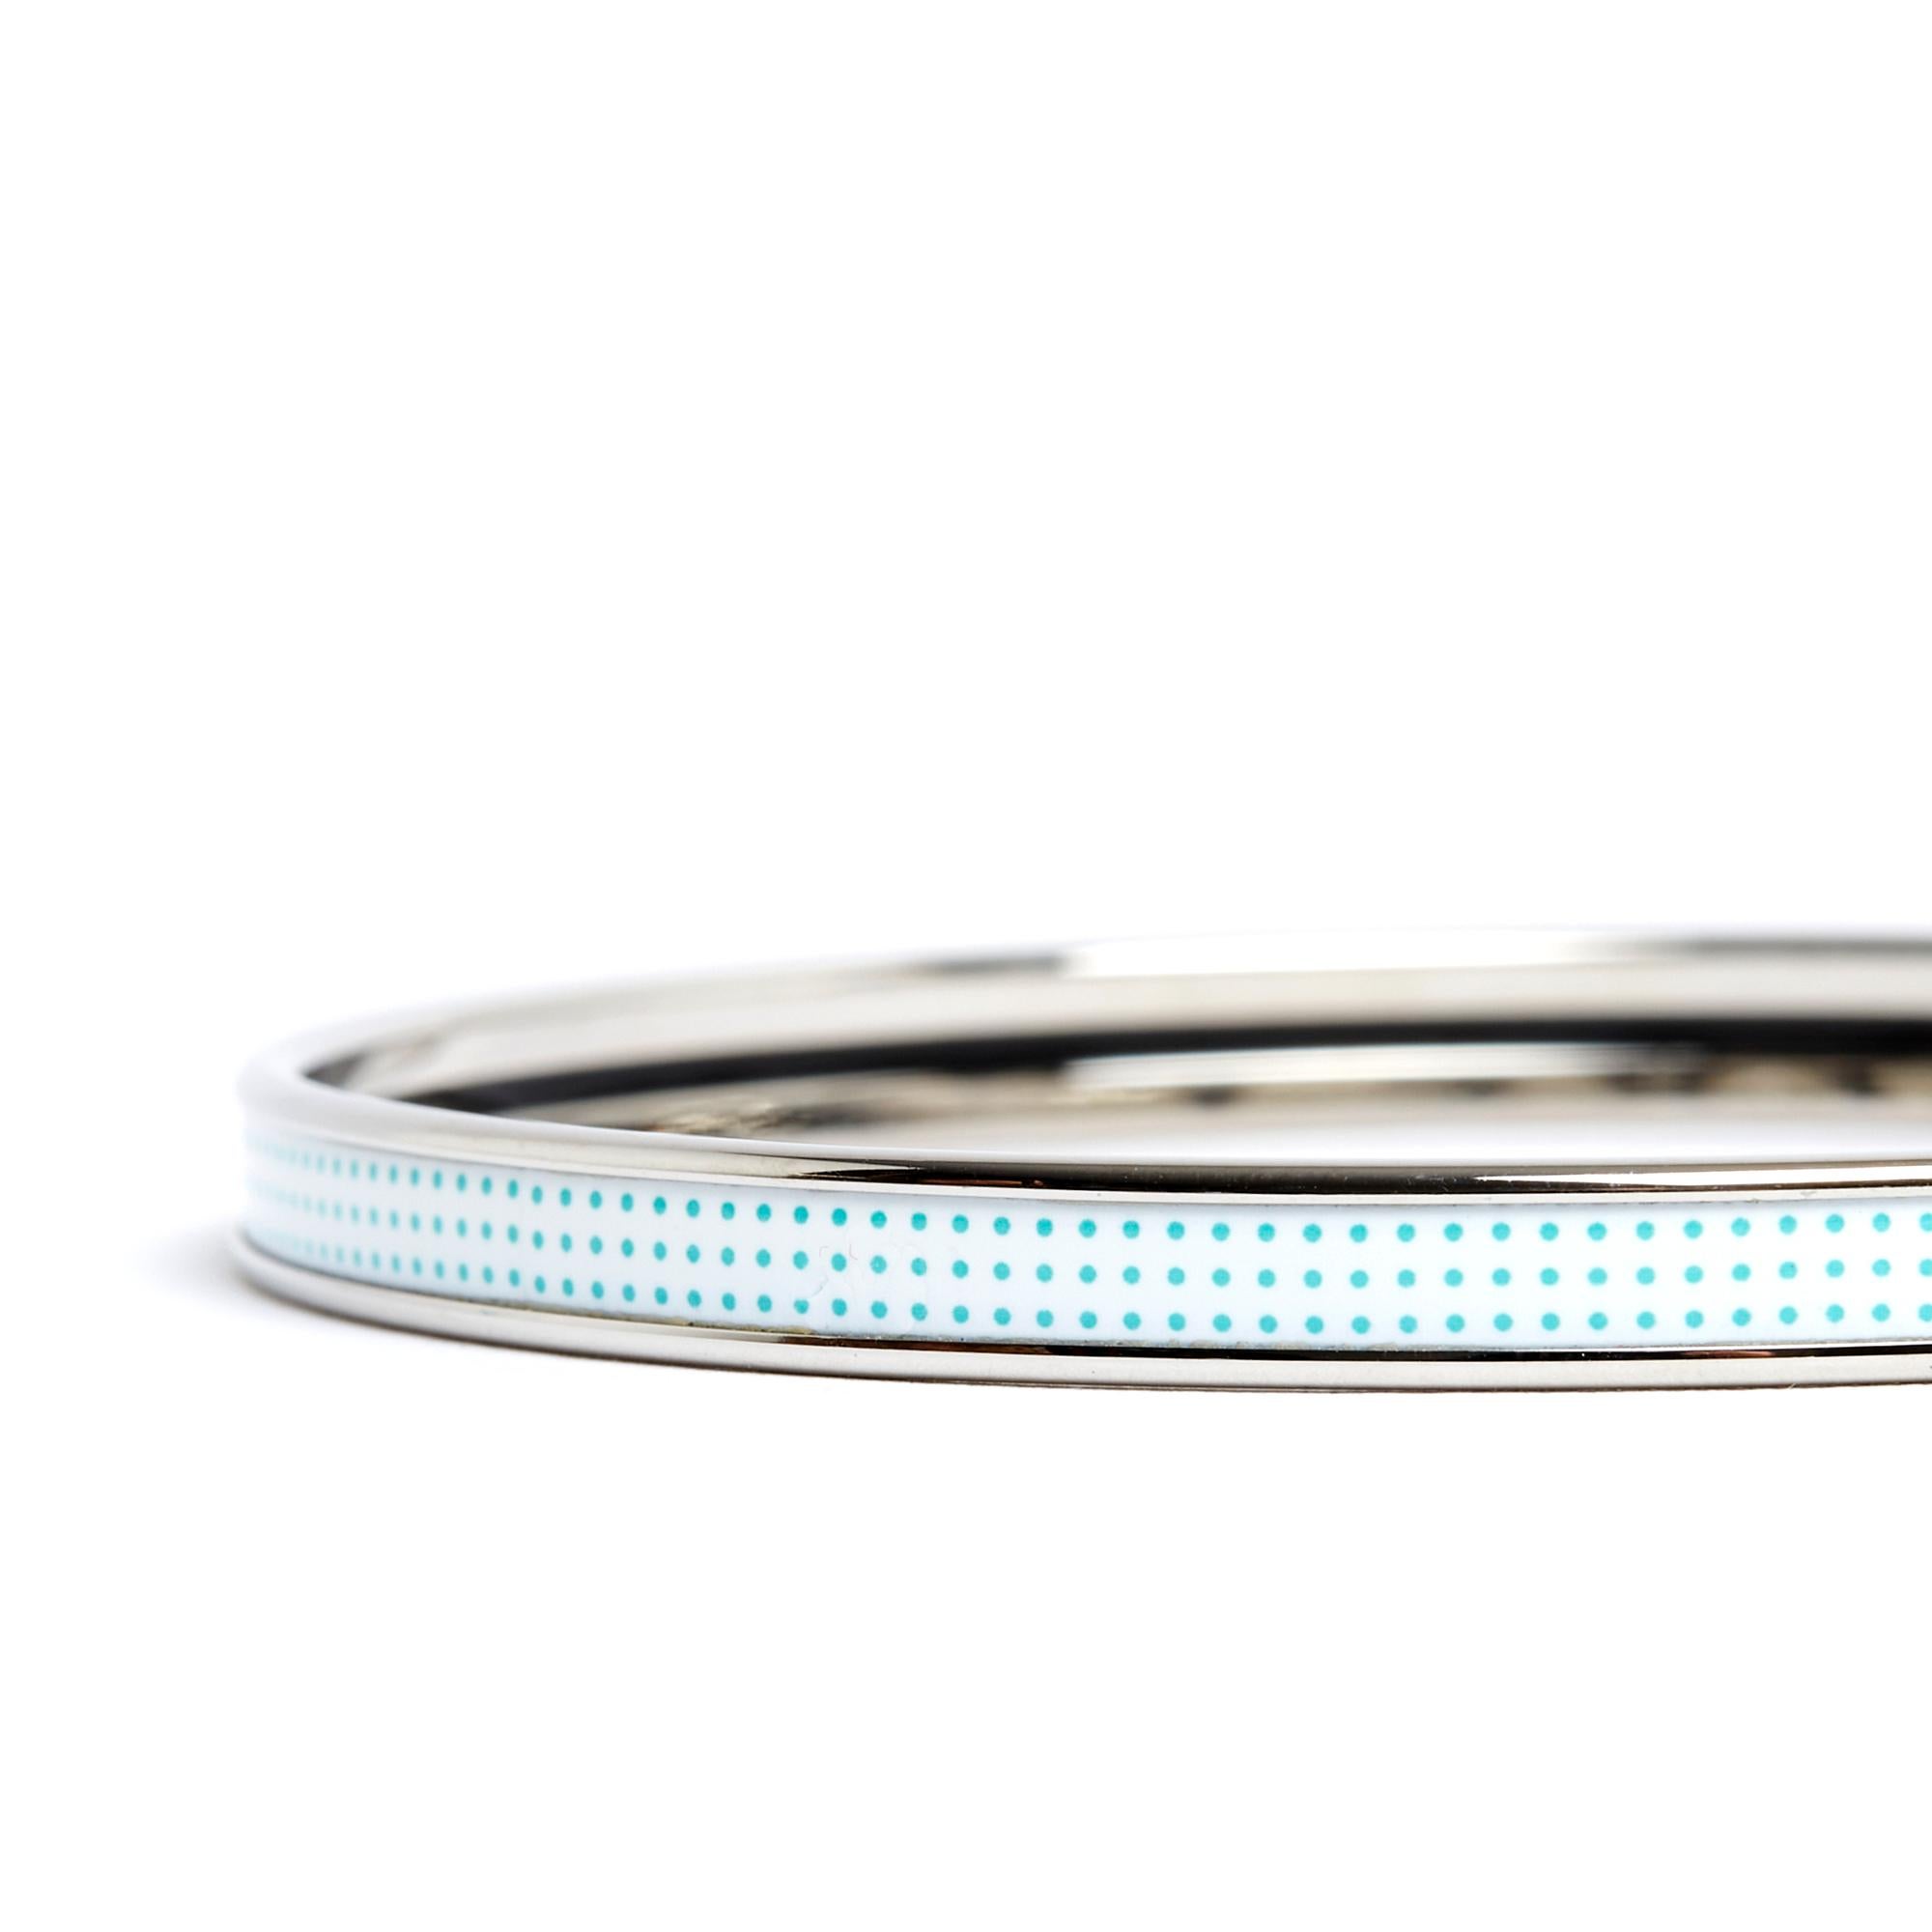 Extra-narrow enamel bracelet printed with small blue polka dots, silver finish (palladium). Size 70 or L: inner diameter 6.8 cm, width: 5.6 mm. The bracelet is marked with the S of sales, it is in very good condition, probably little worn, delivered